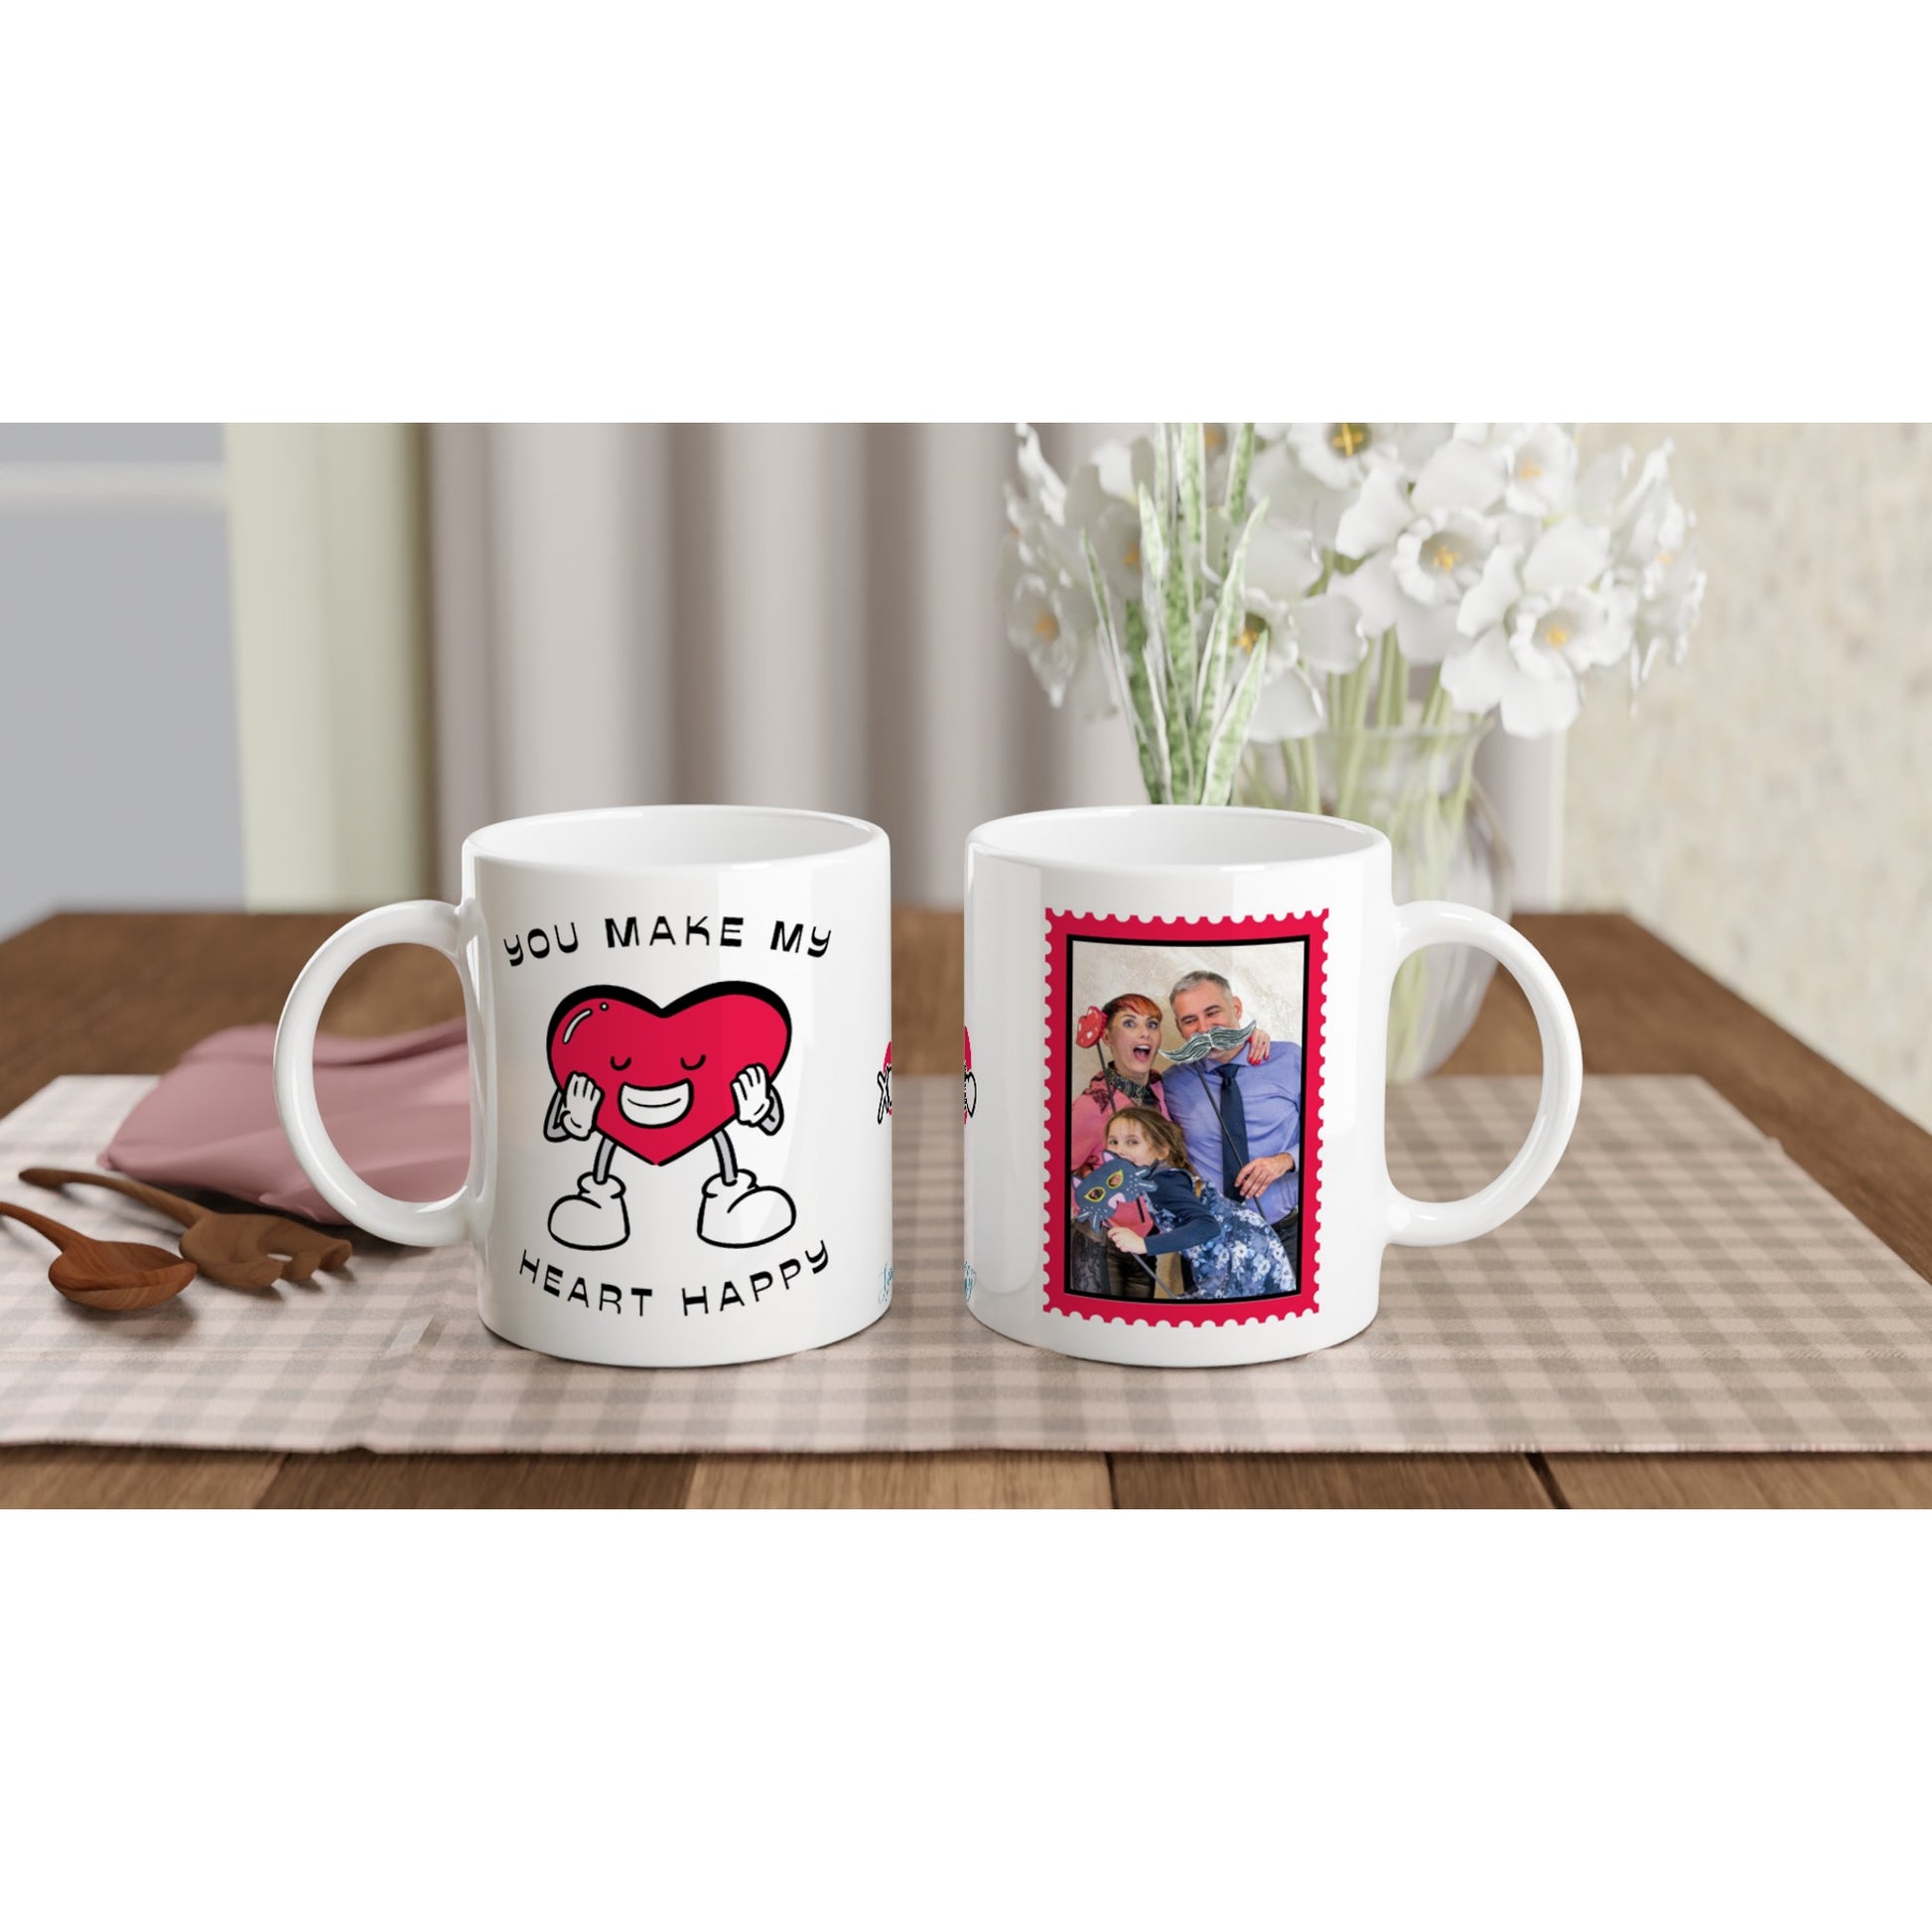 "You Make My Heart Happy" Customizable Photo 11 oz. Mug back and front view on table